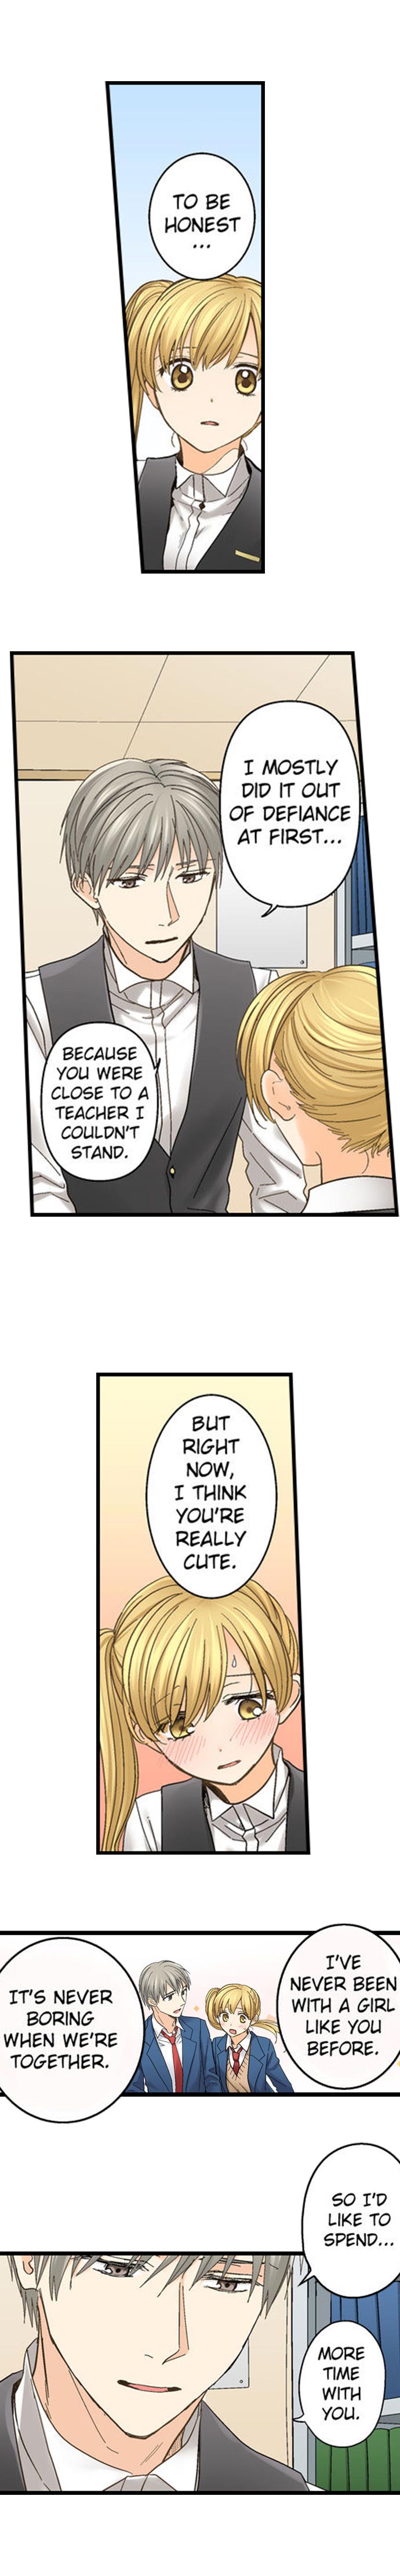 Running a Love Hotel with My Math Teacher - Chapter 58 Page 2